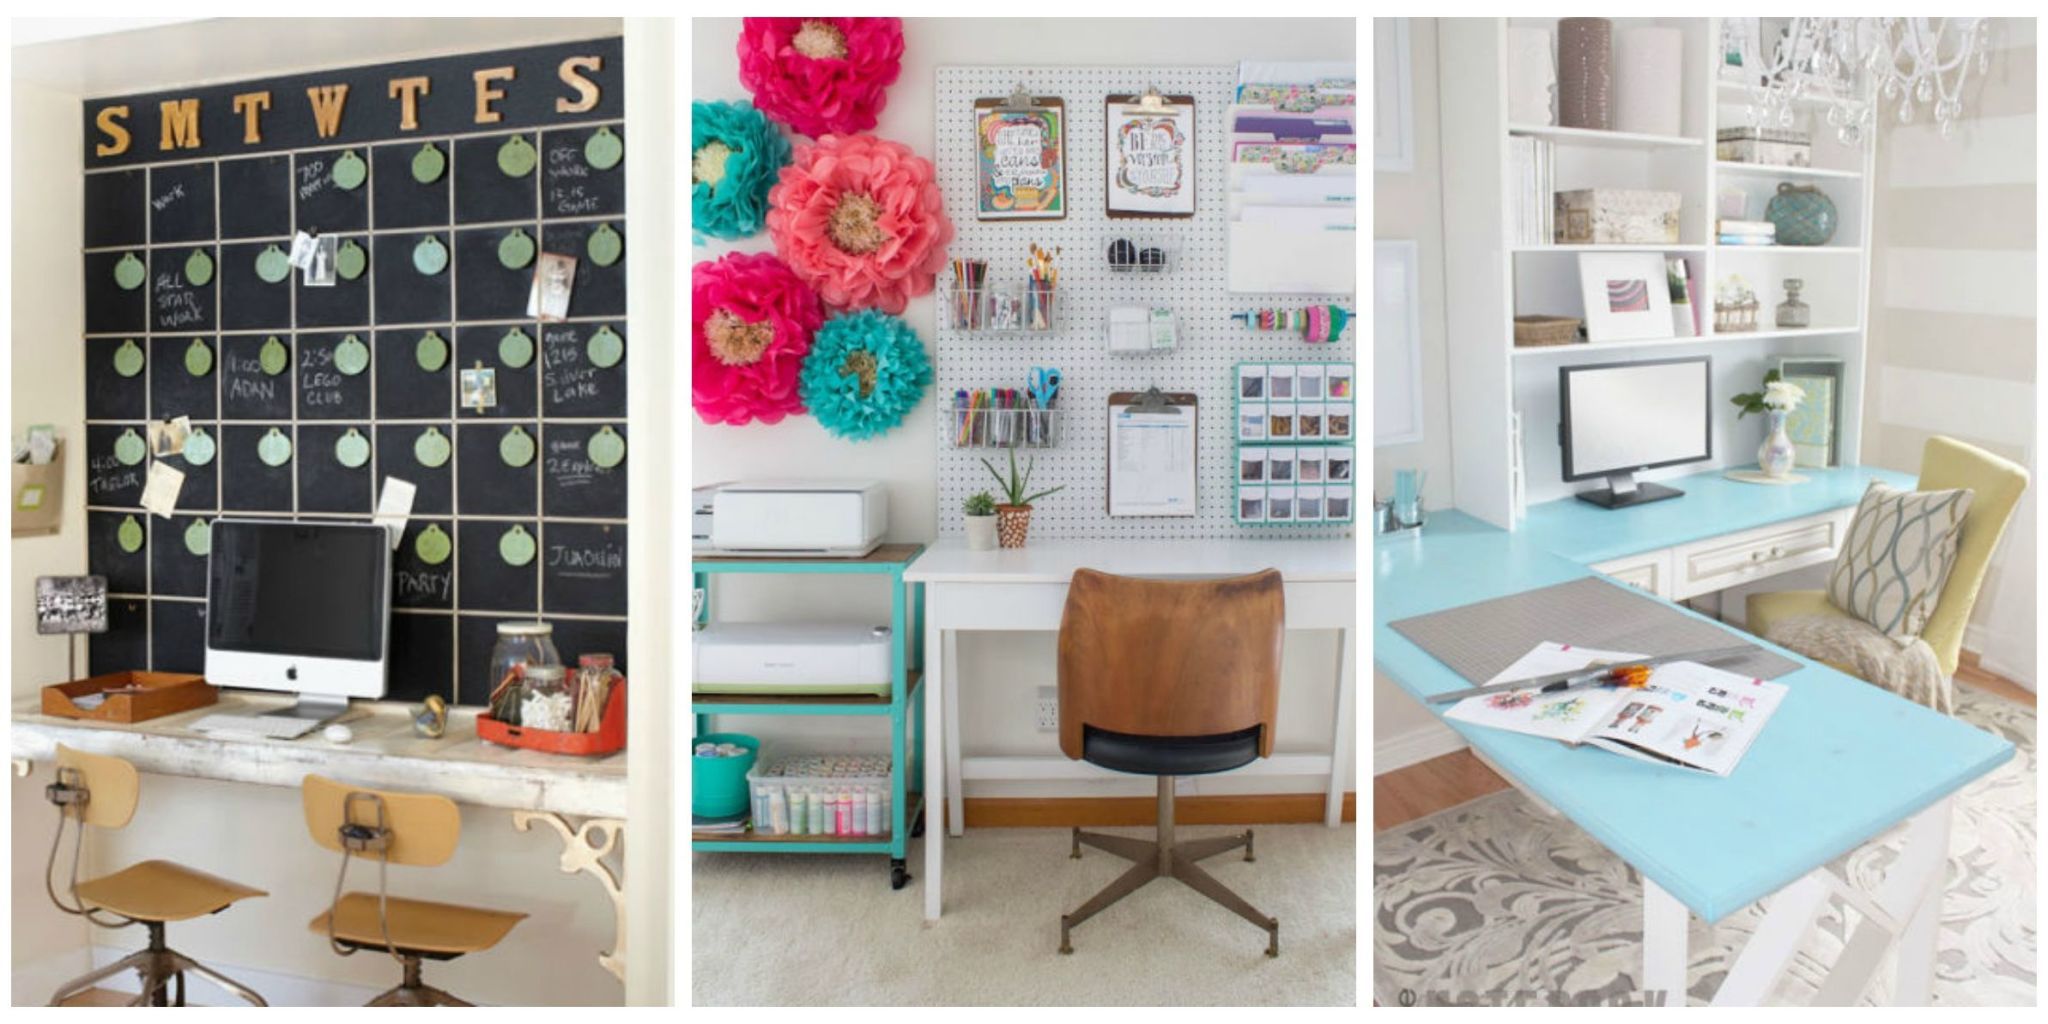 Home Office Ideas - How to Decorate a Home Office